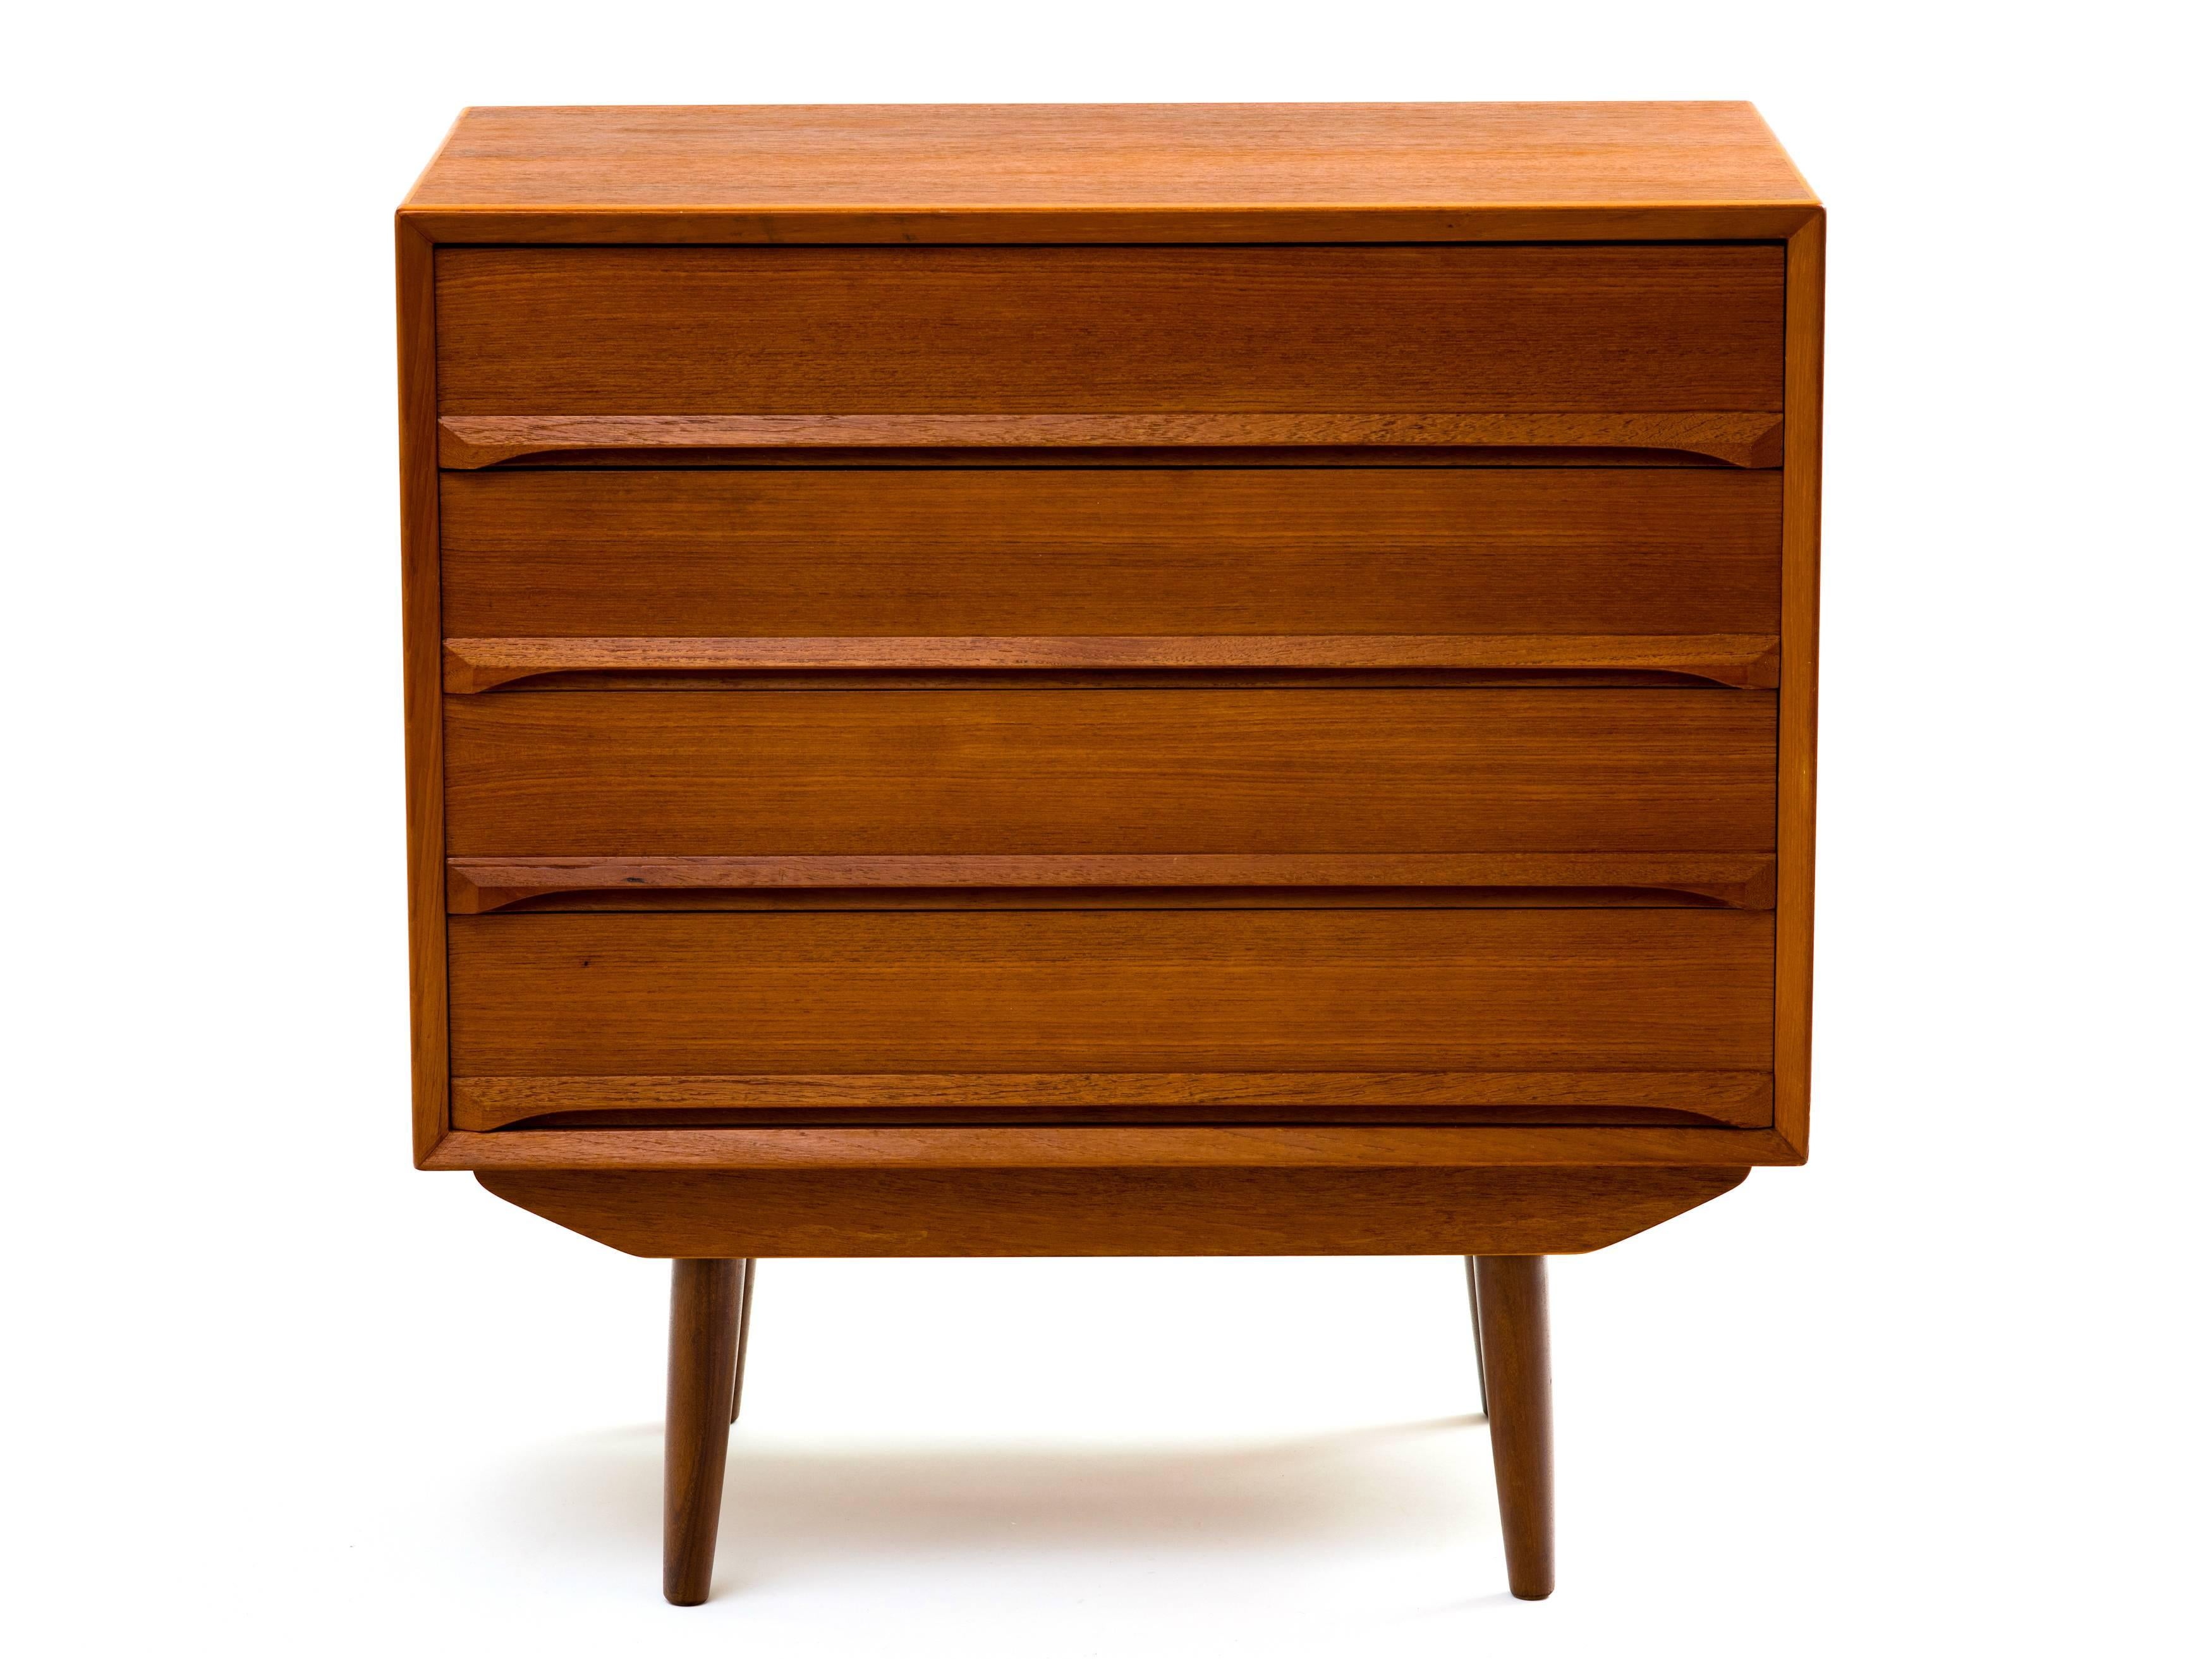 A petite chest of drawers or dresser in teak designed by Svend Aage Madsen for Falster, 1960s. A perfect choice for a small space with attractive features: chamfered front edges, 'skirt' detail between the body and legs at both front and back,